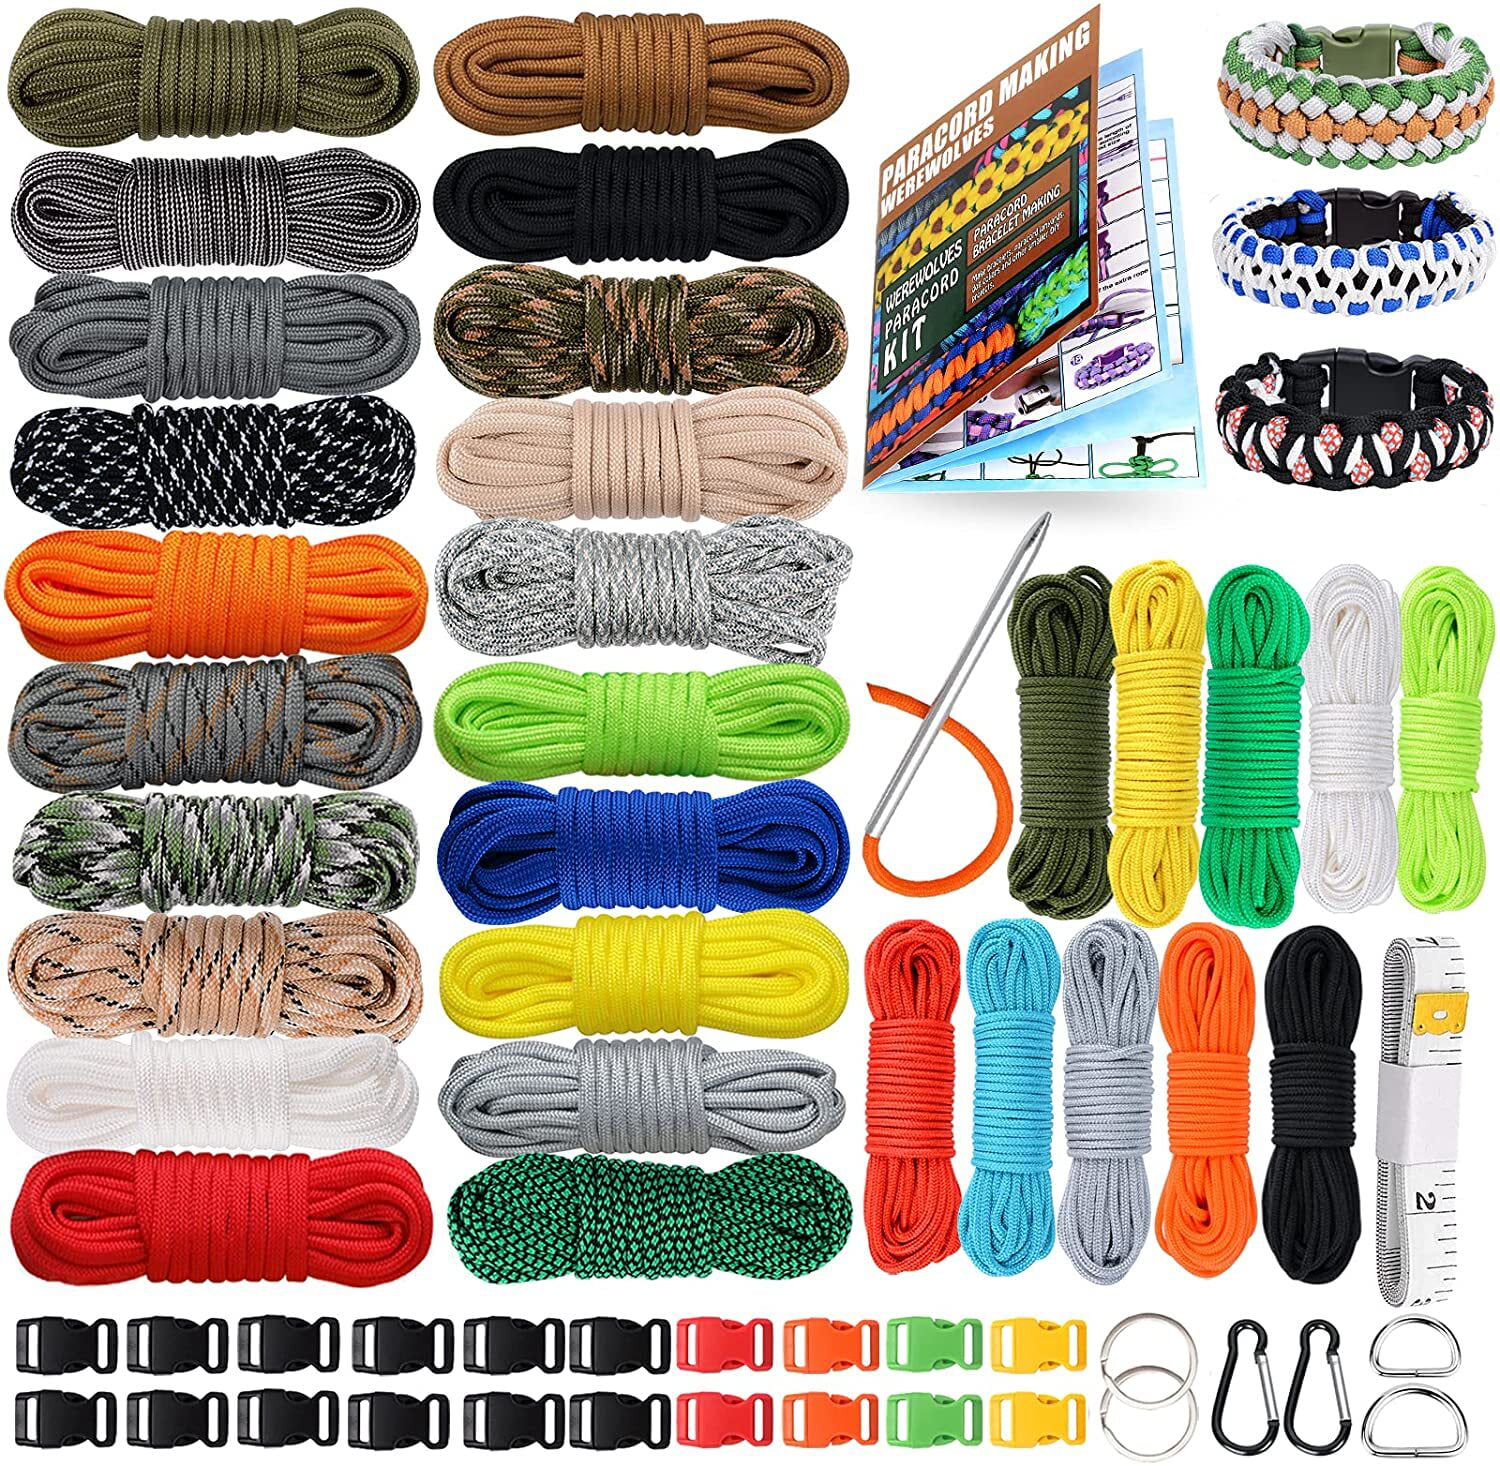 WEREWOLVES Paracord 550, 4MM Paracord 20 Colors & 2MM Micro Paracord Rope  10 Colors with Instructions Book, Paracord Bracelet Combo Crafting Kits,  Parachute Cord and Complete Accessories 